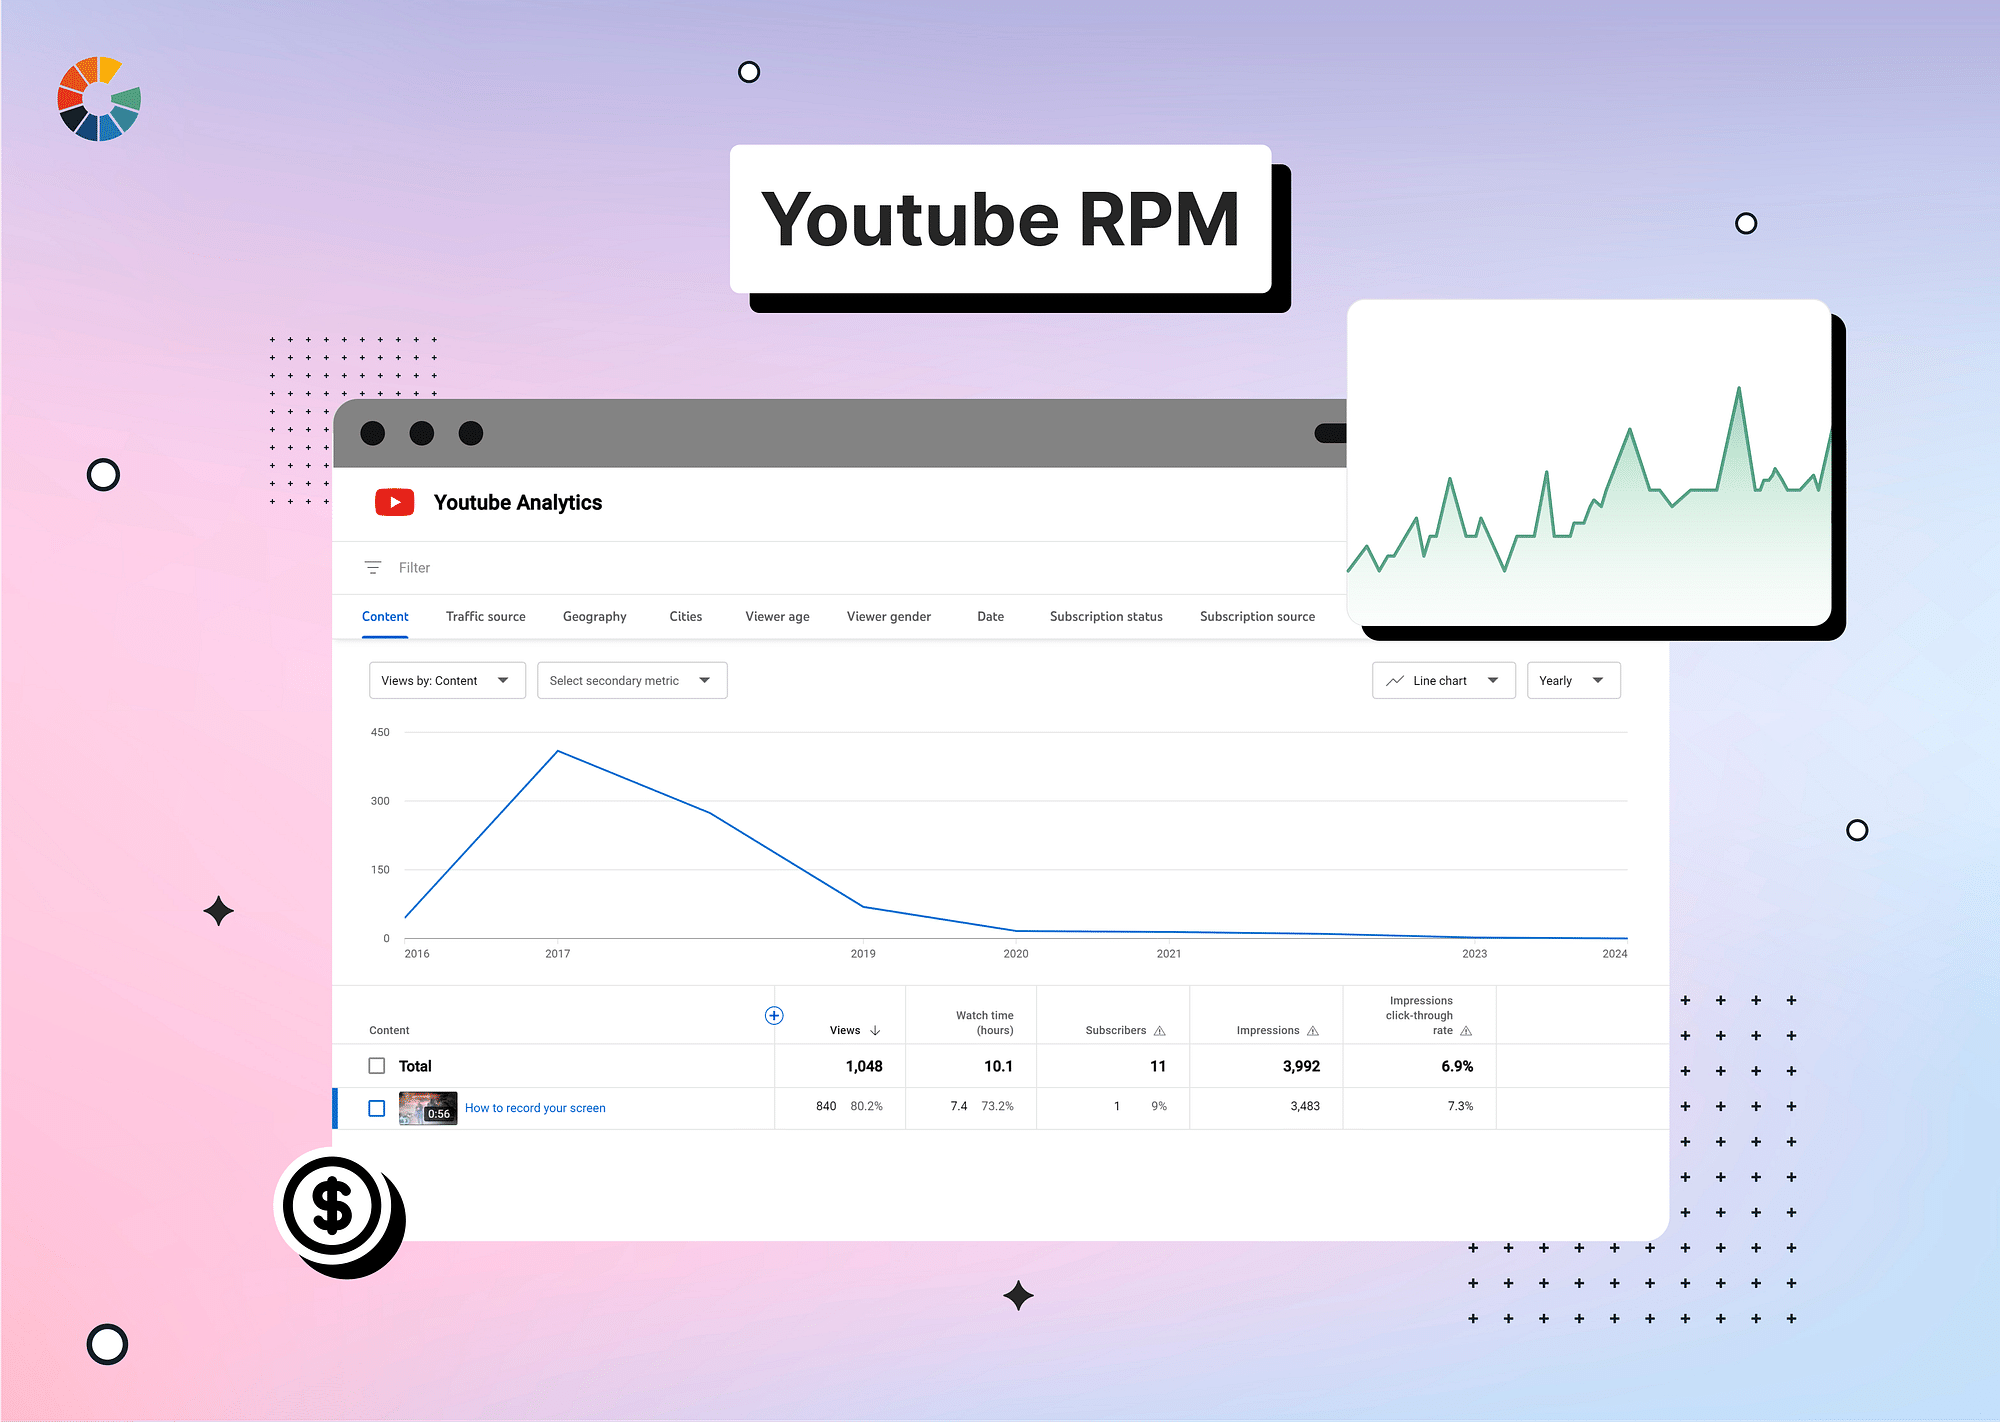 YouTube RPM: What is it and How to Improve it?